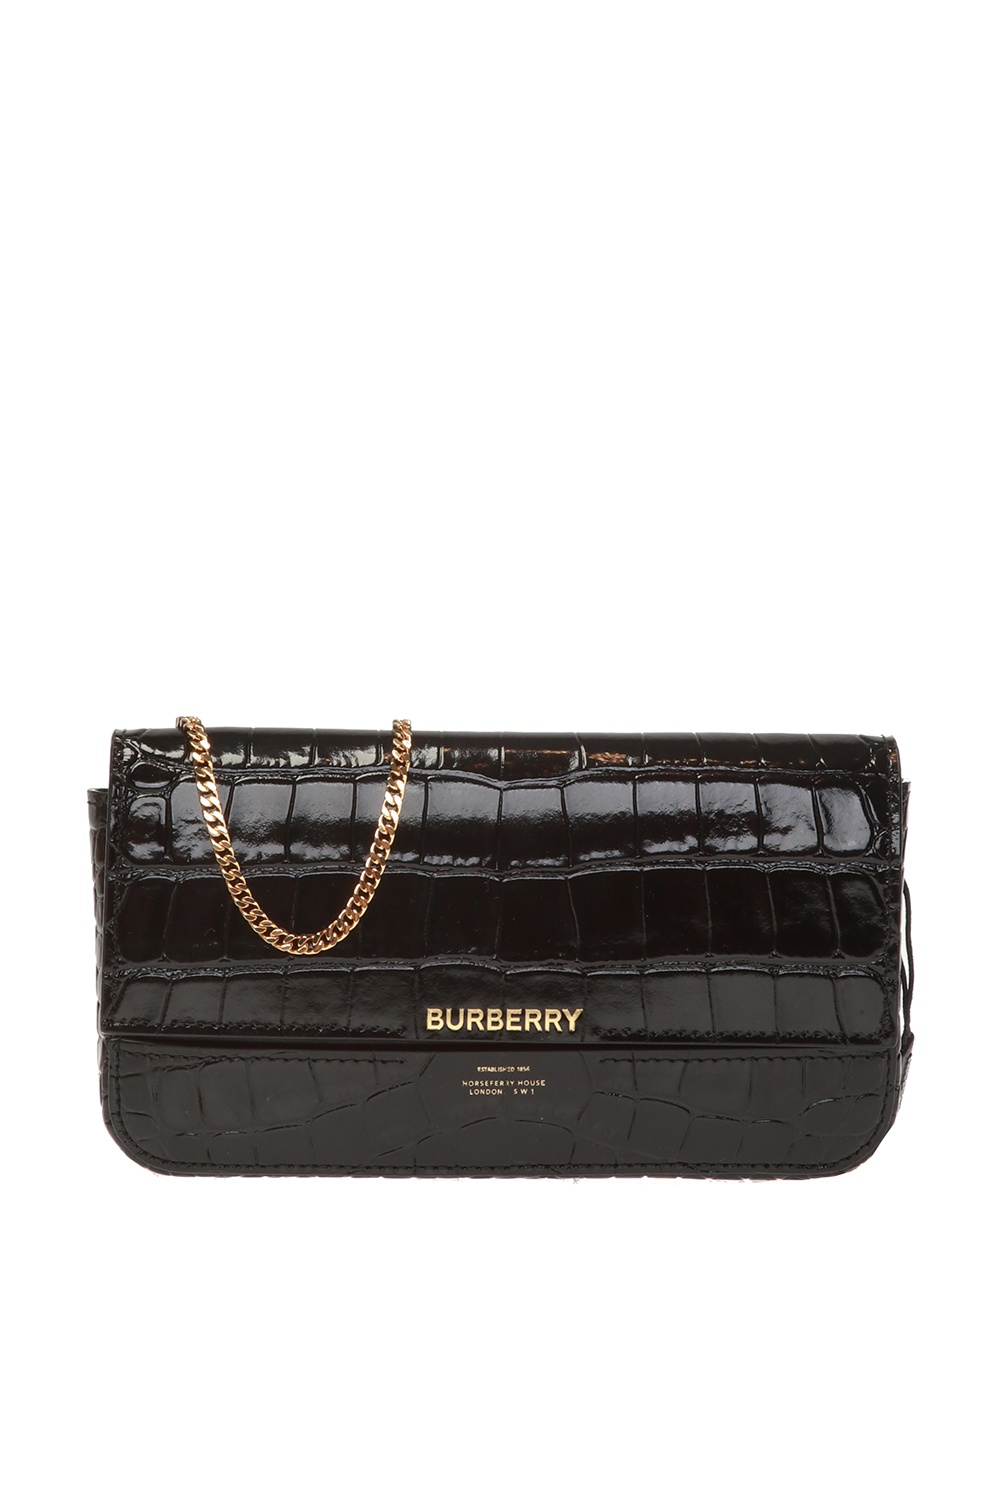 burberry us bags